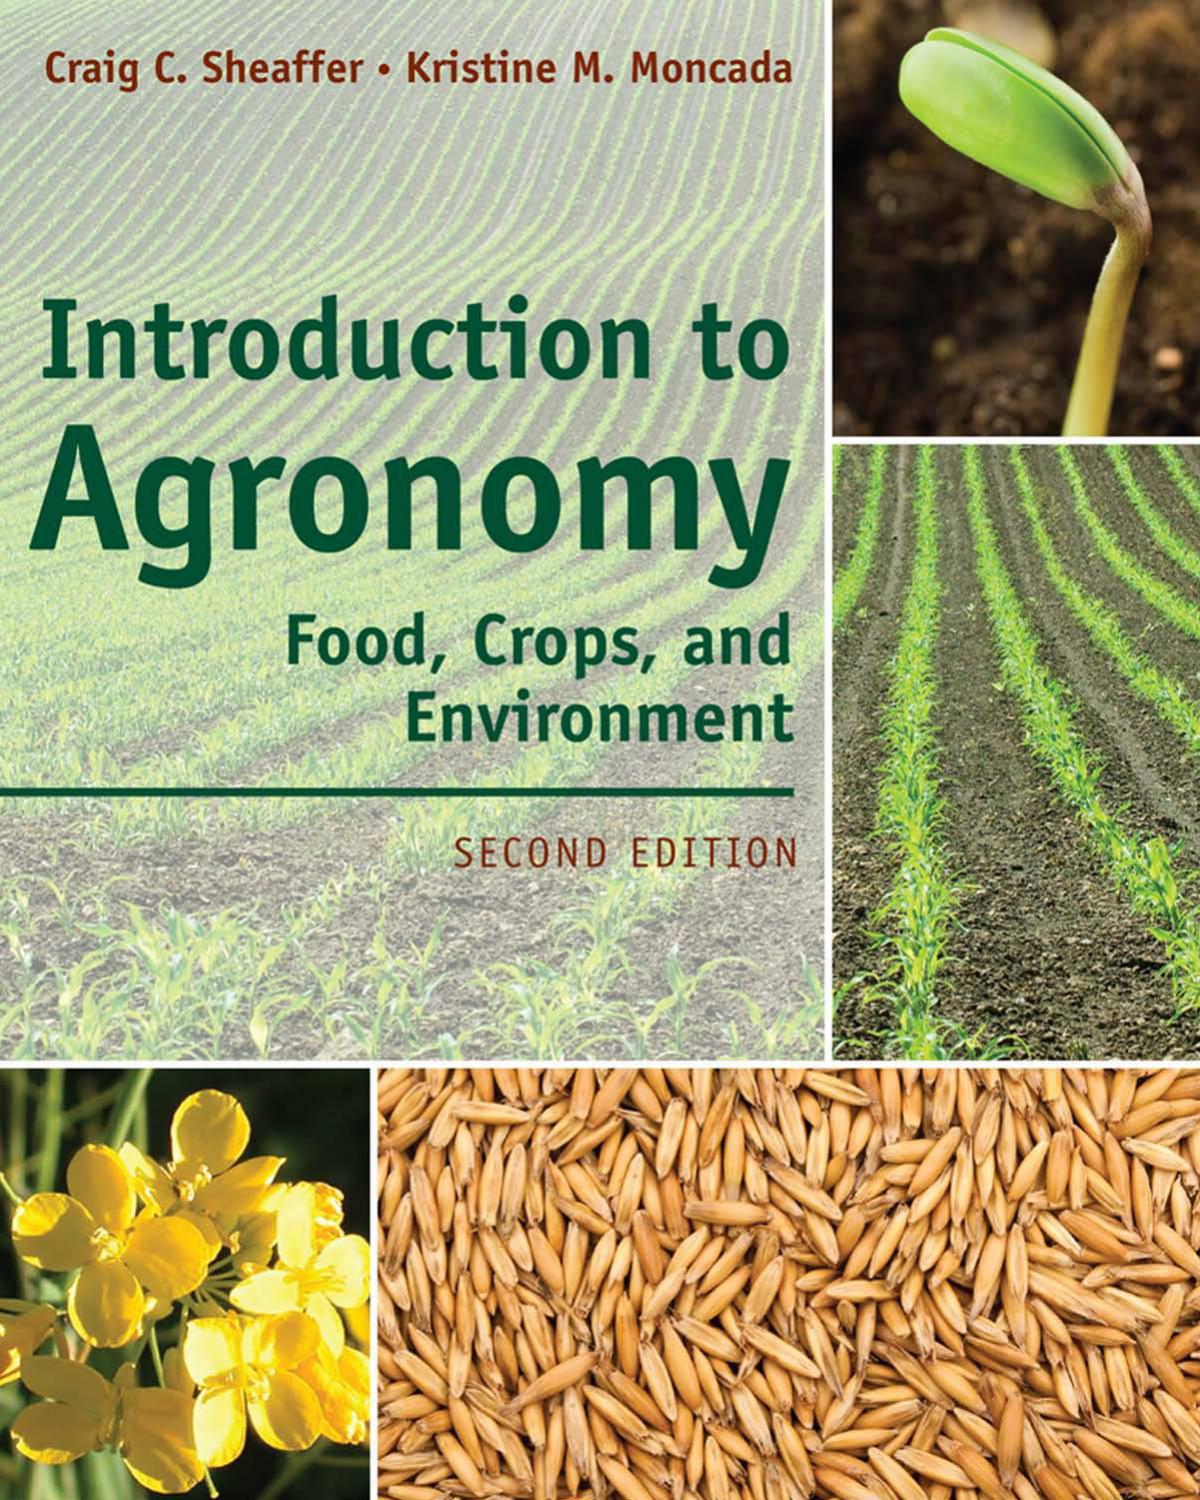 Introduction to Agronomy: Food, Crops, and Environment, 2nd ed.